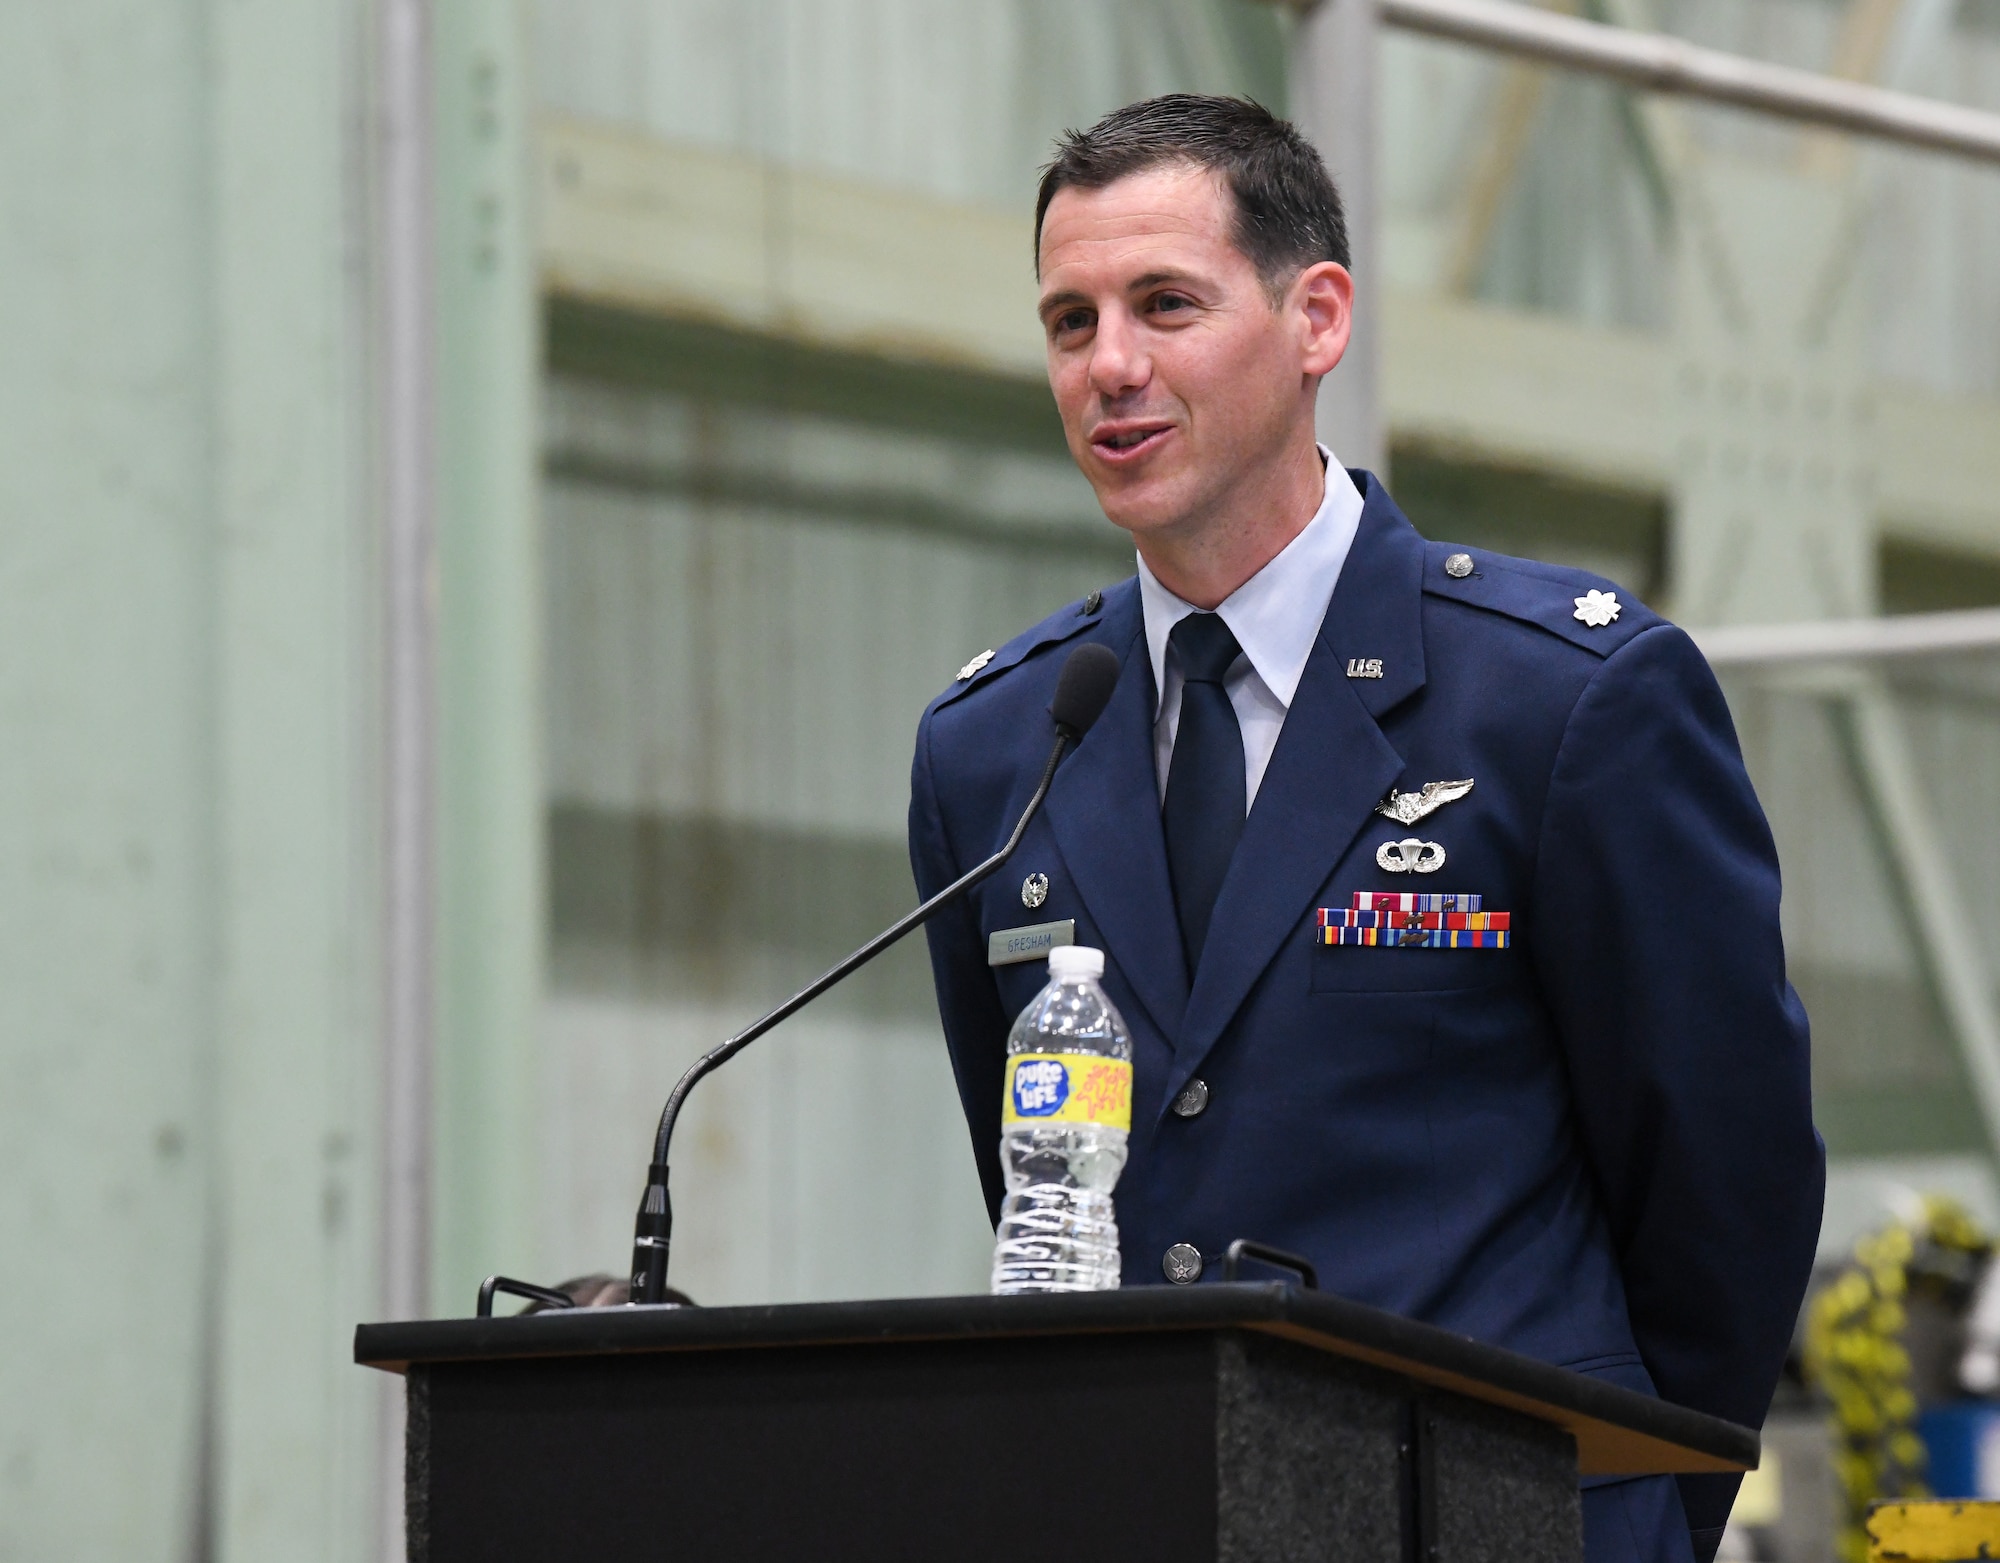 Lt. Col. James Gresham, commander of the 716th Test Squadron, 804th Test Group, Arnold Engineering Development Complex, speaks after assuming command of the 716 TS during a change of command ceremony June 30, 2022.